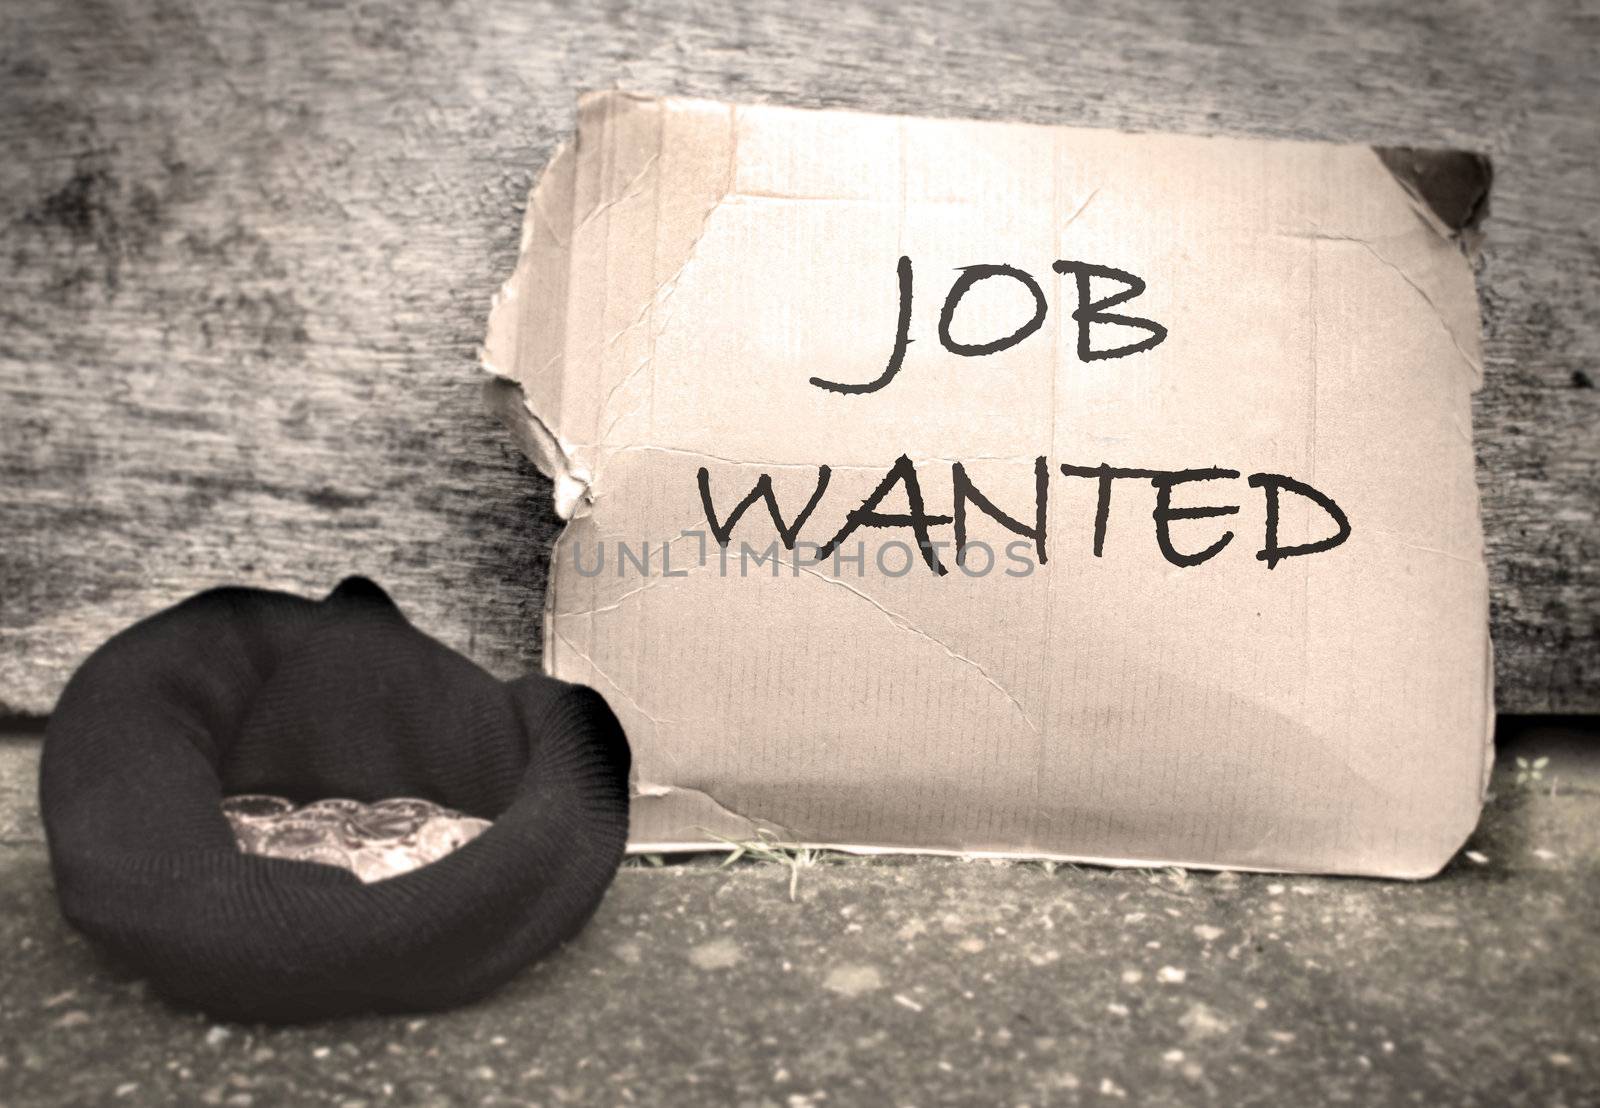 Job wanted sign written on a piece of cardboard